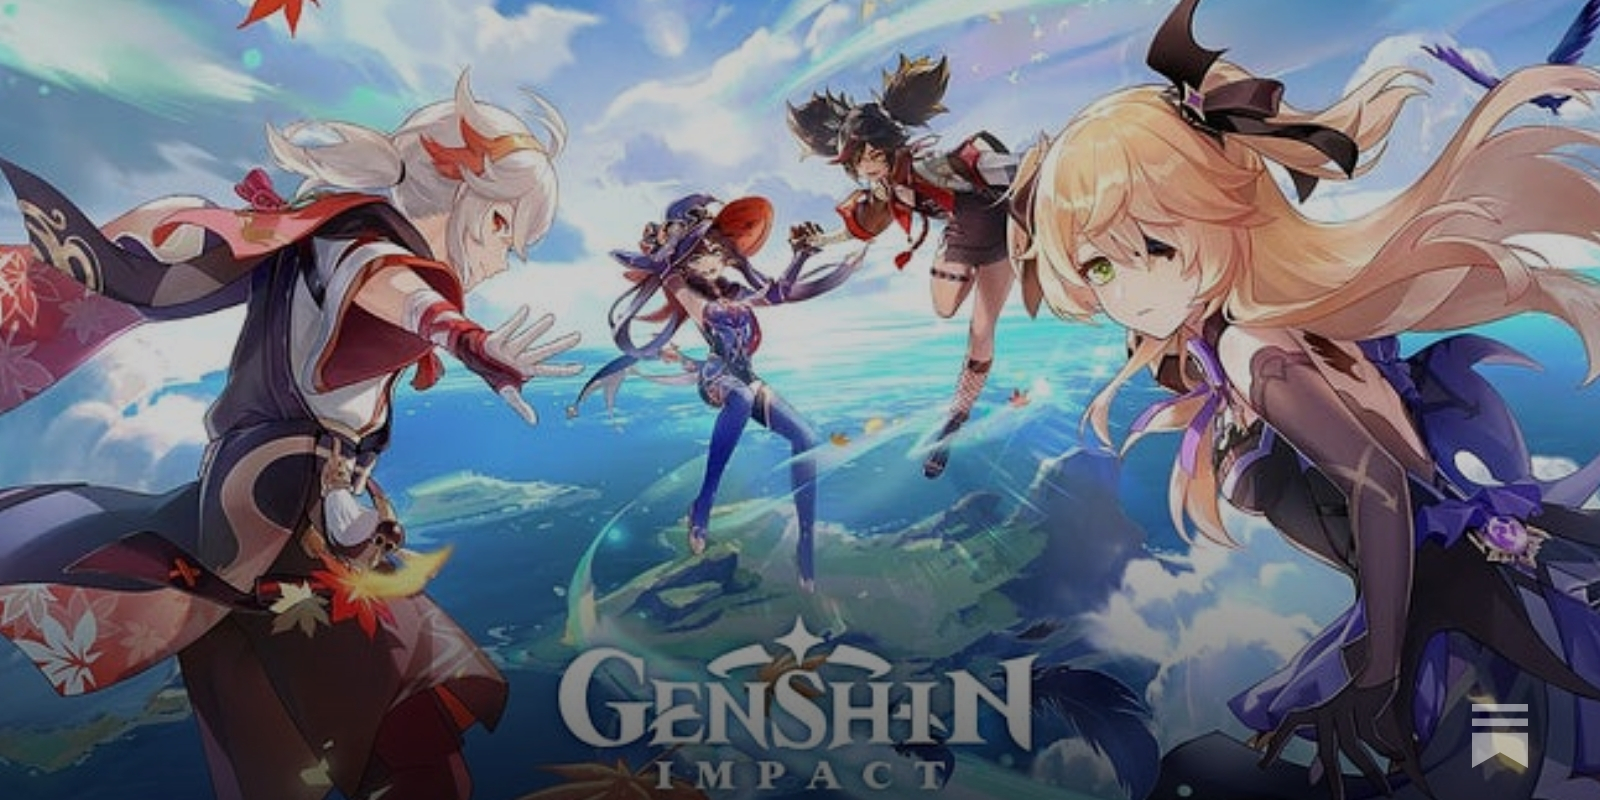 Genshin Impact' Feels Destined To Change The Gaming Industry